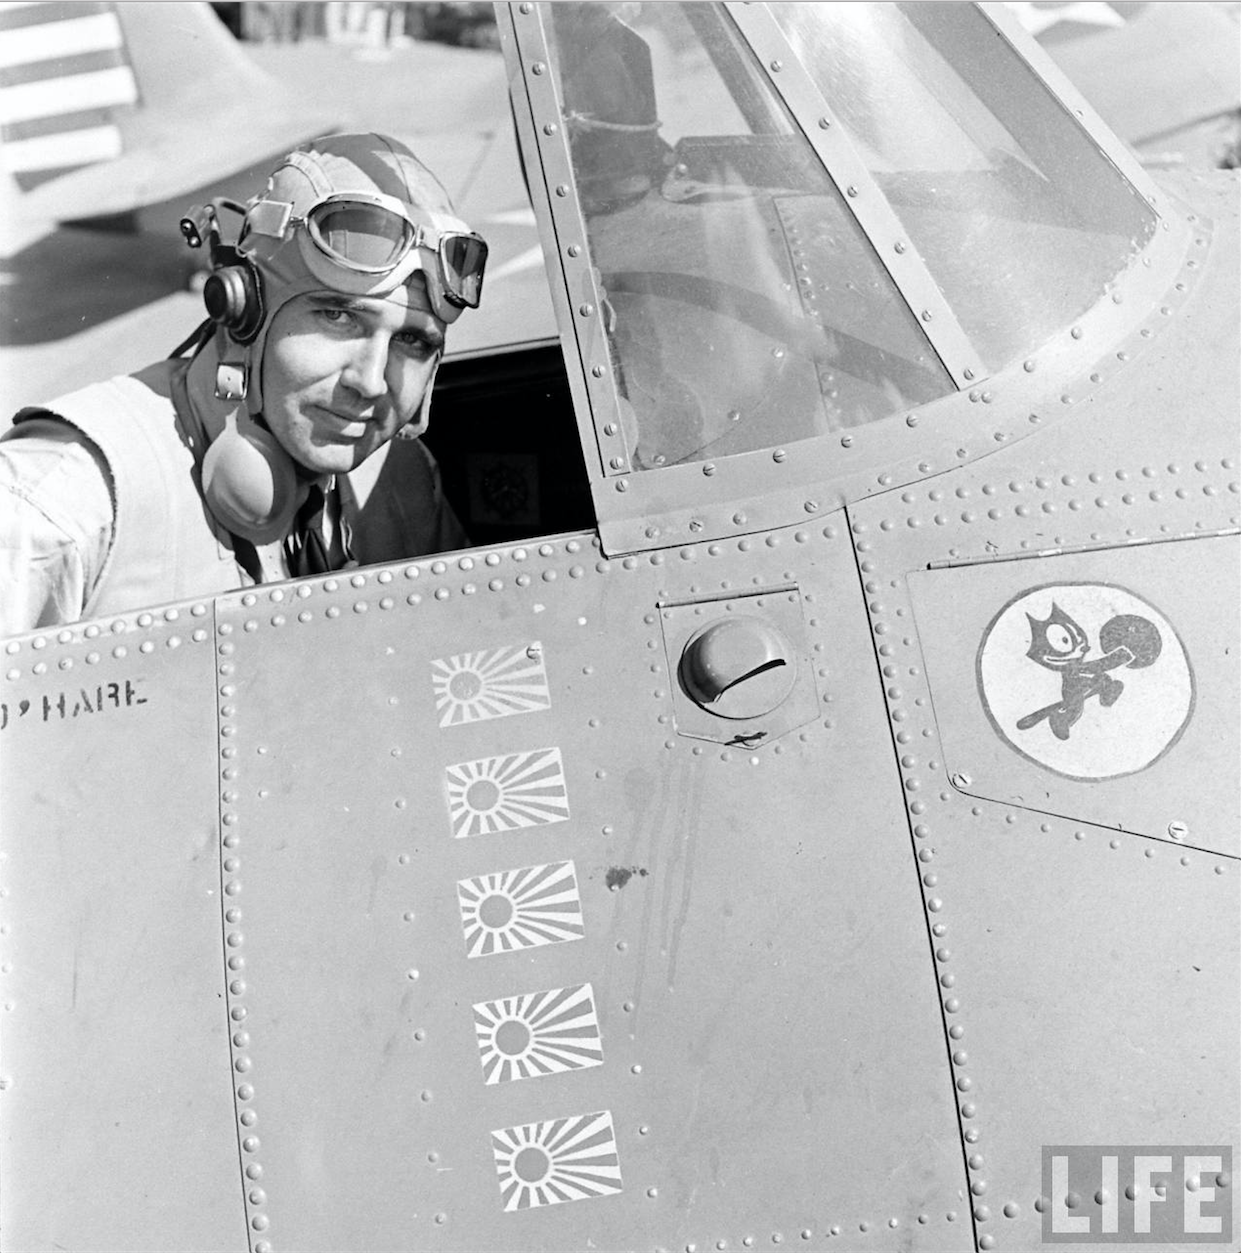 Lieutenant "Butch" O'Hare in teh cockpit of his Grumman F4F-3 Wildcat fighter. The "Felix the Cat" insignia represents the Fighter Squadron. The five flags signify the enemy airplanes destroyed in combat 20 February 1942. (LIFE Magazine)